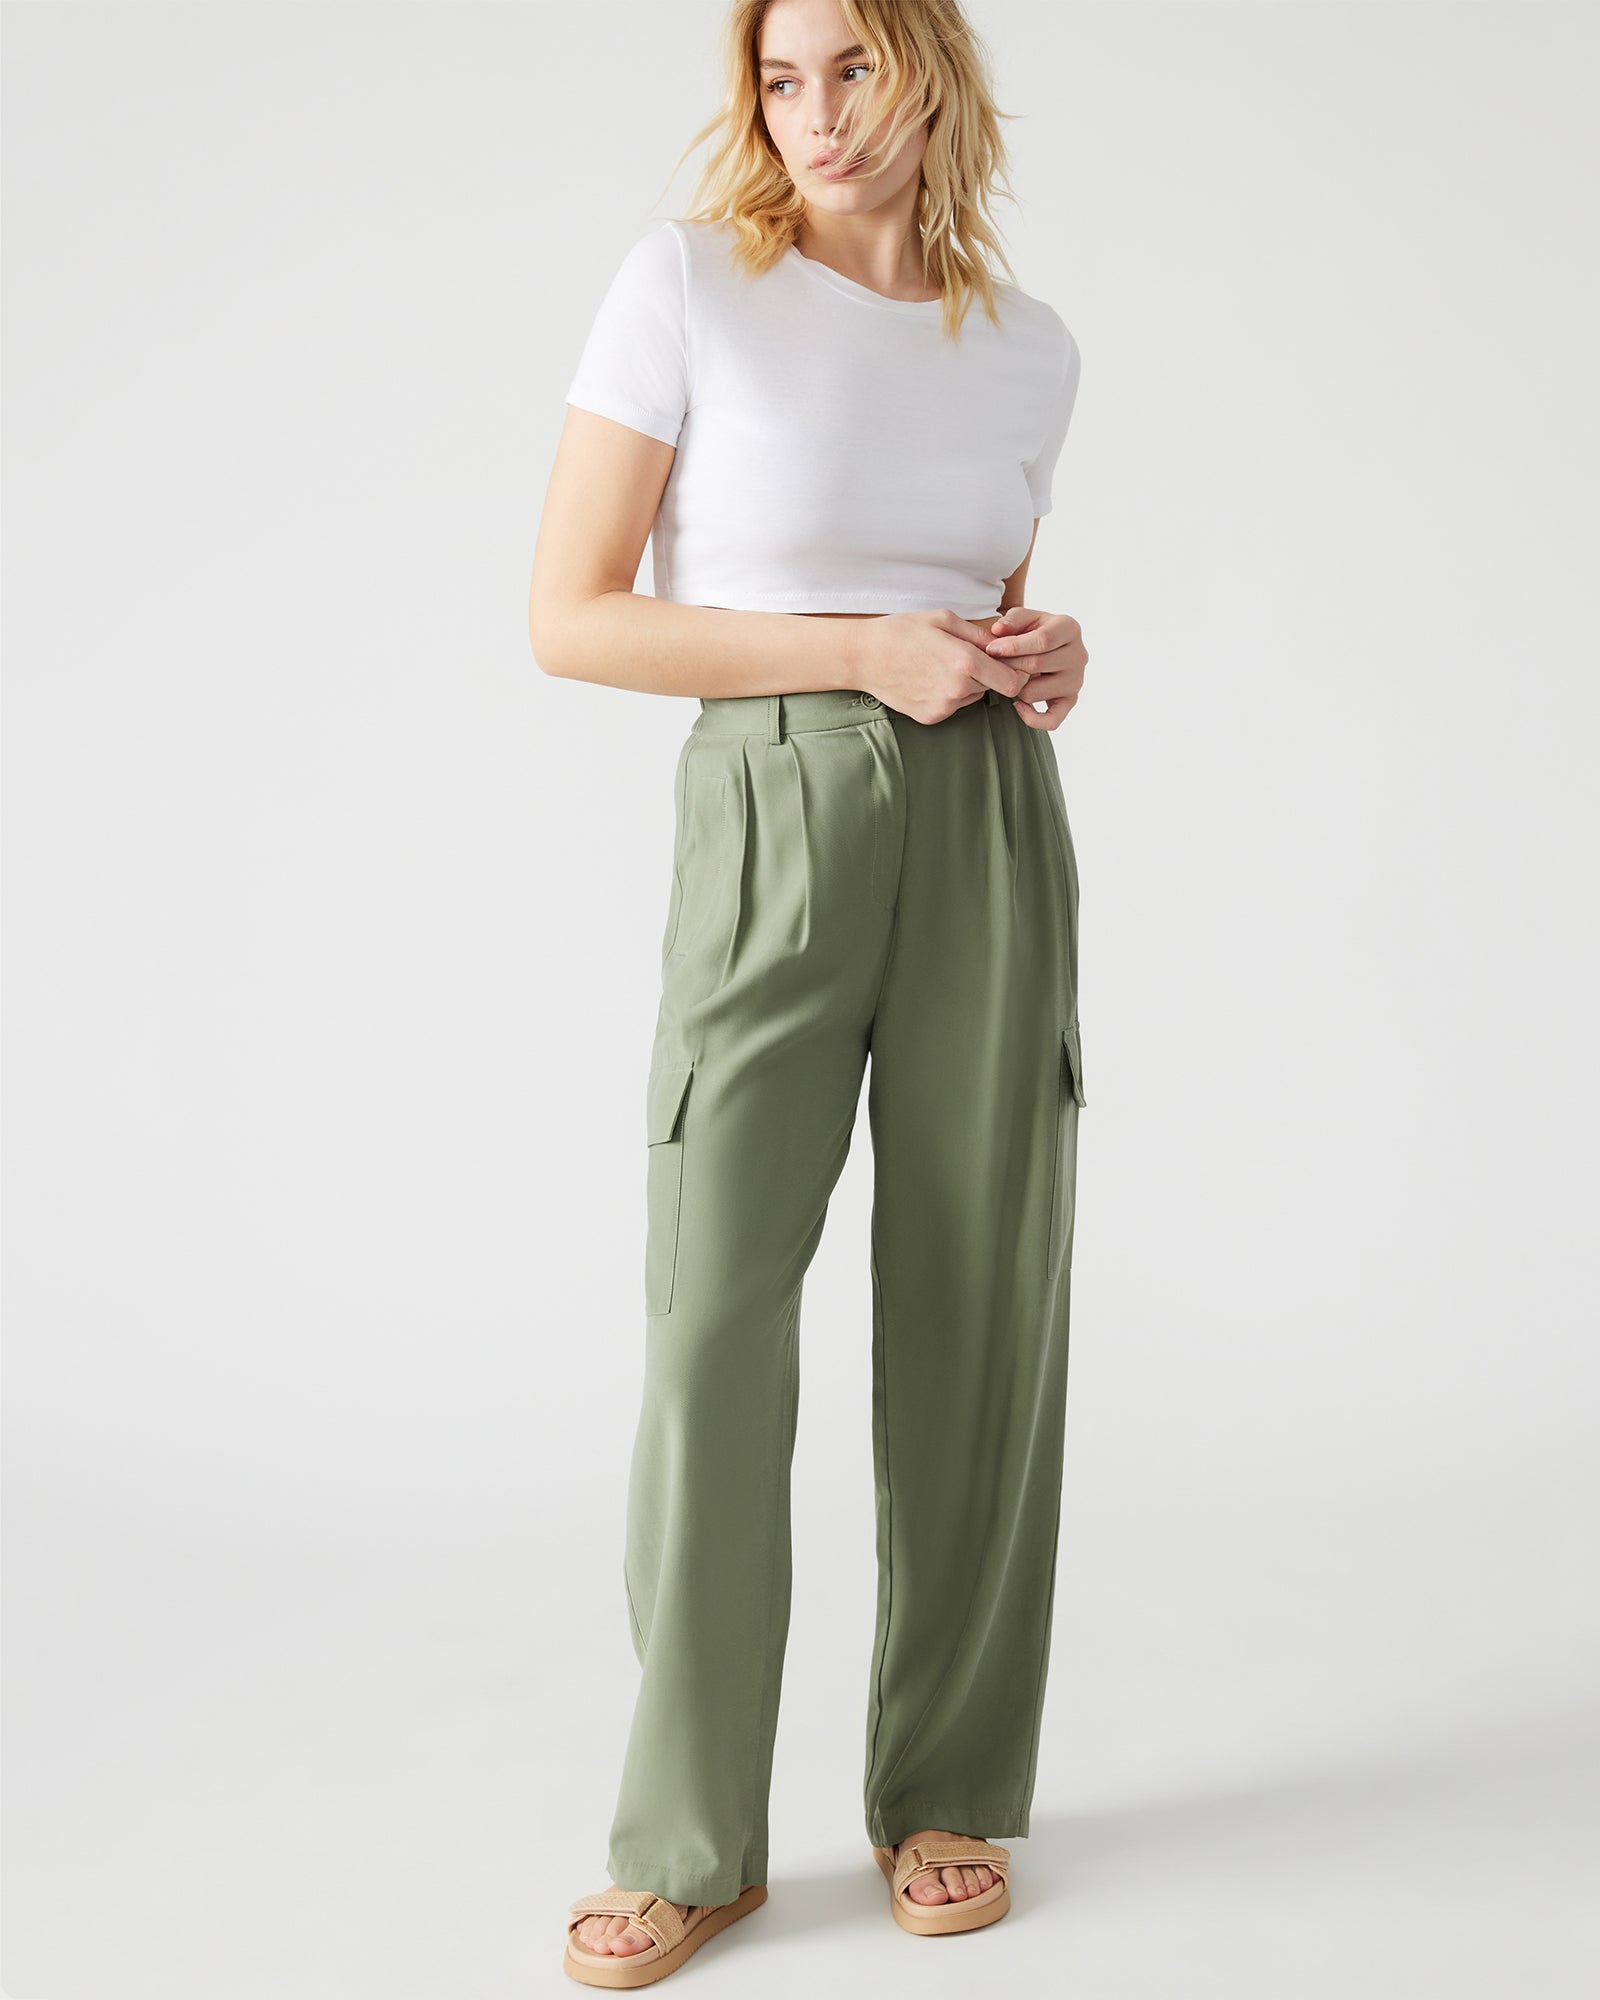 Transform your wardrobe with the Wide Leg Pant Set - Olive. Featuring